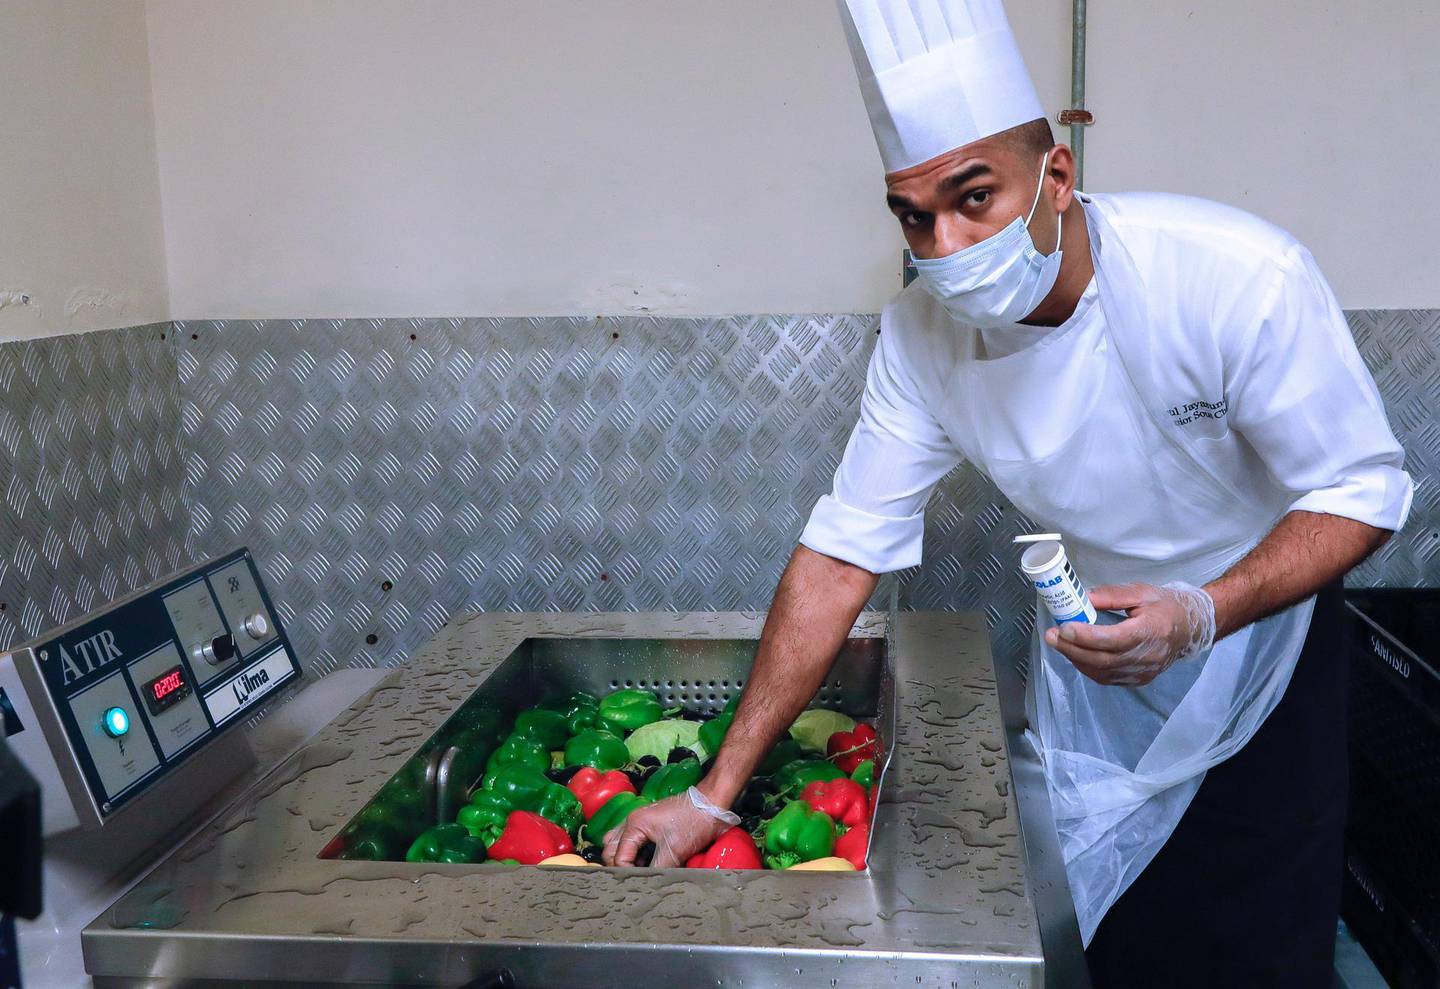 Abu Dhabi, United Arab Emirates, August 12, 2020.   Media Tour at The Westin Abu Dhabi Golf Resort & Spa on how tourism officials are conducting the go safe certification for hotels against Covid-19.   Upul Jaysundra, a Junior Sous Chef makes sure all vegetables are thouroughly and safely washed using special solutions which are later checked by a paper color chart for satisfactory tolerances.Victor Besa /The NationalSection:  NAReporter:  Haneen Dajani